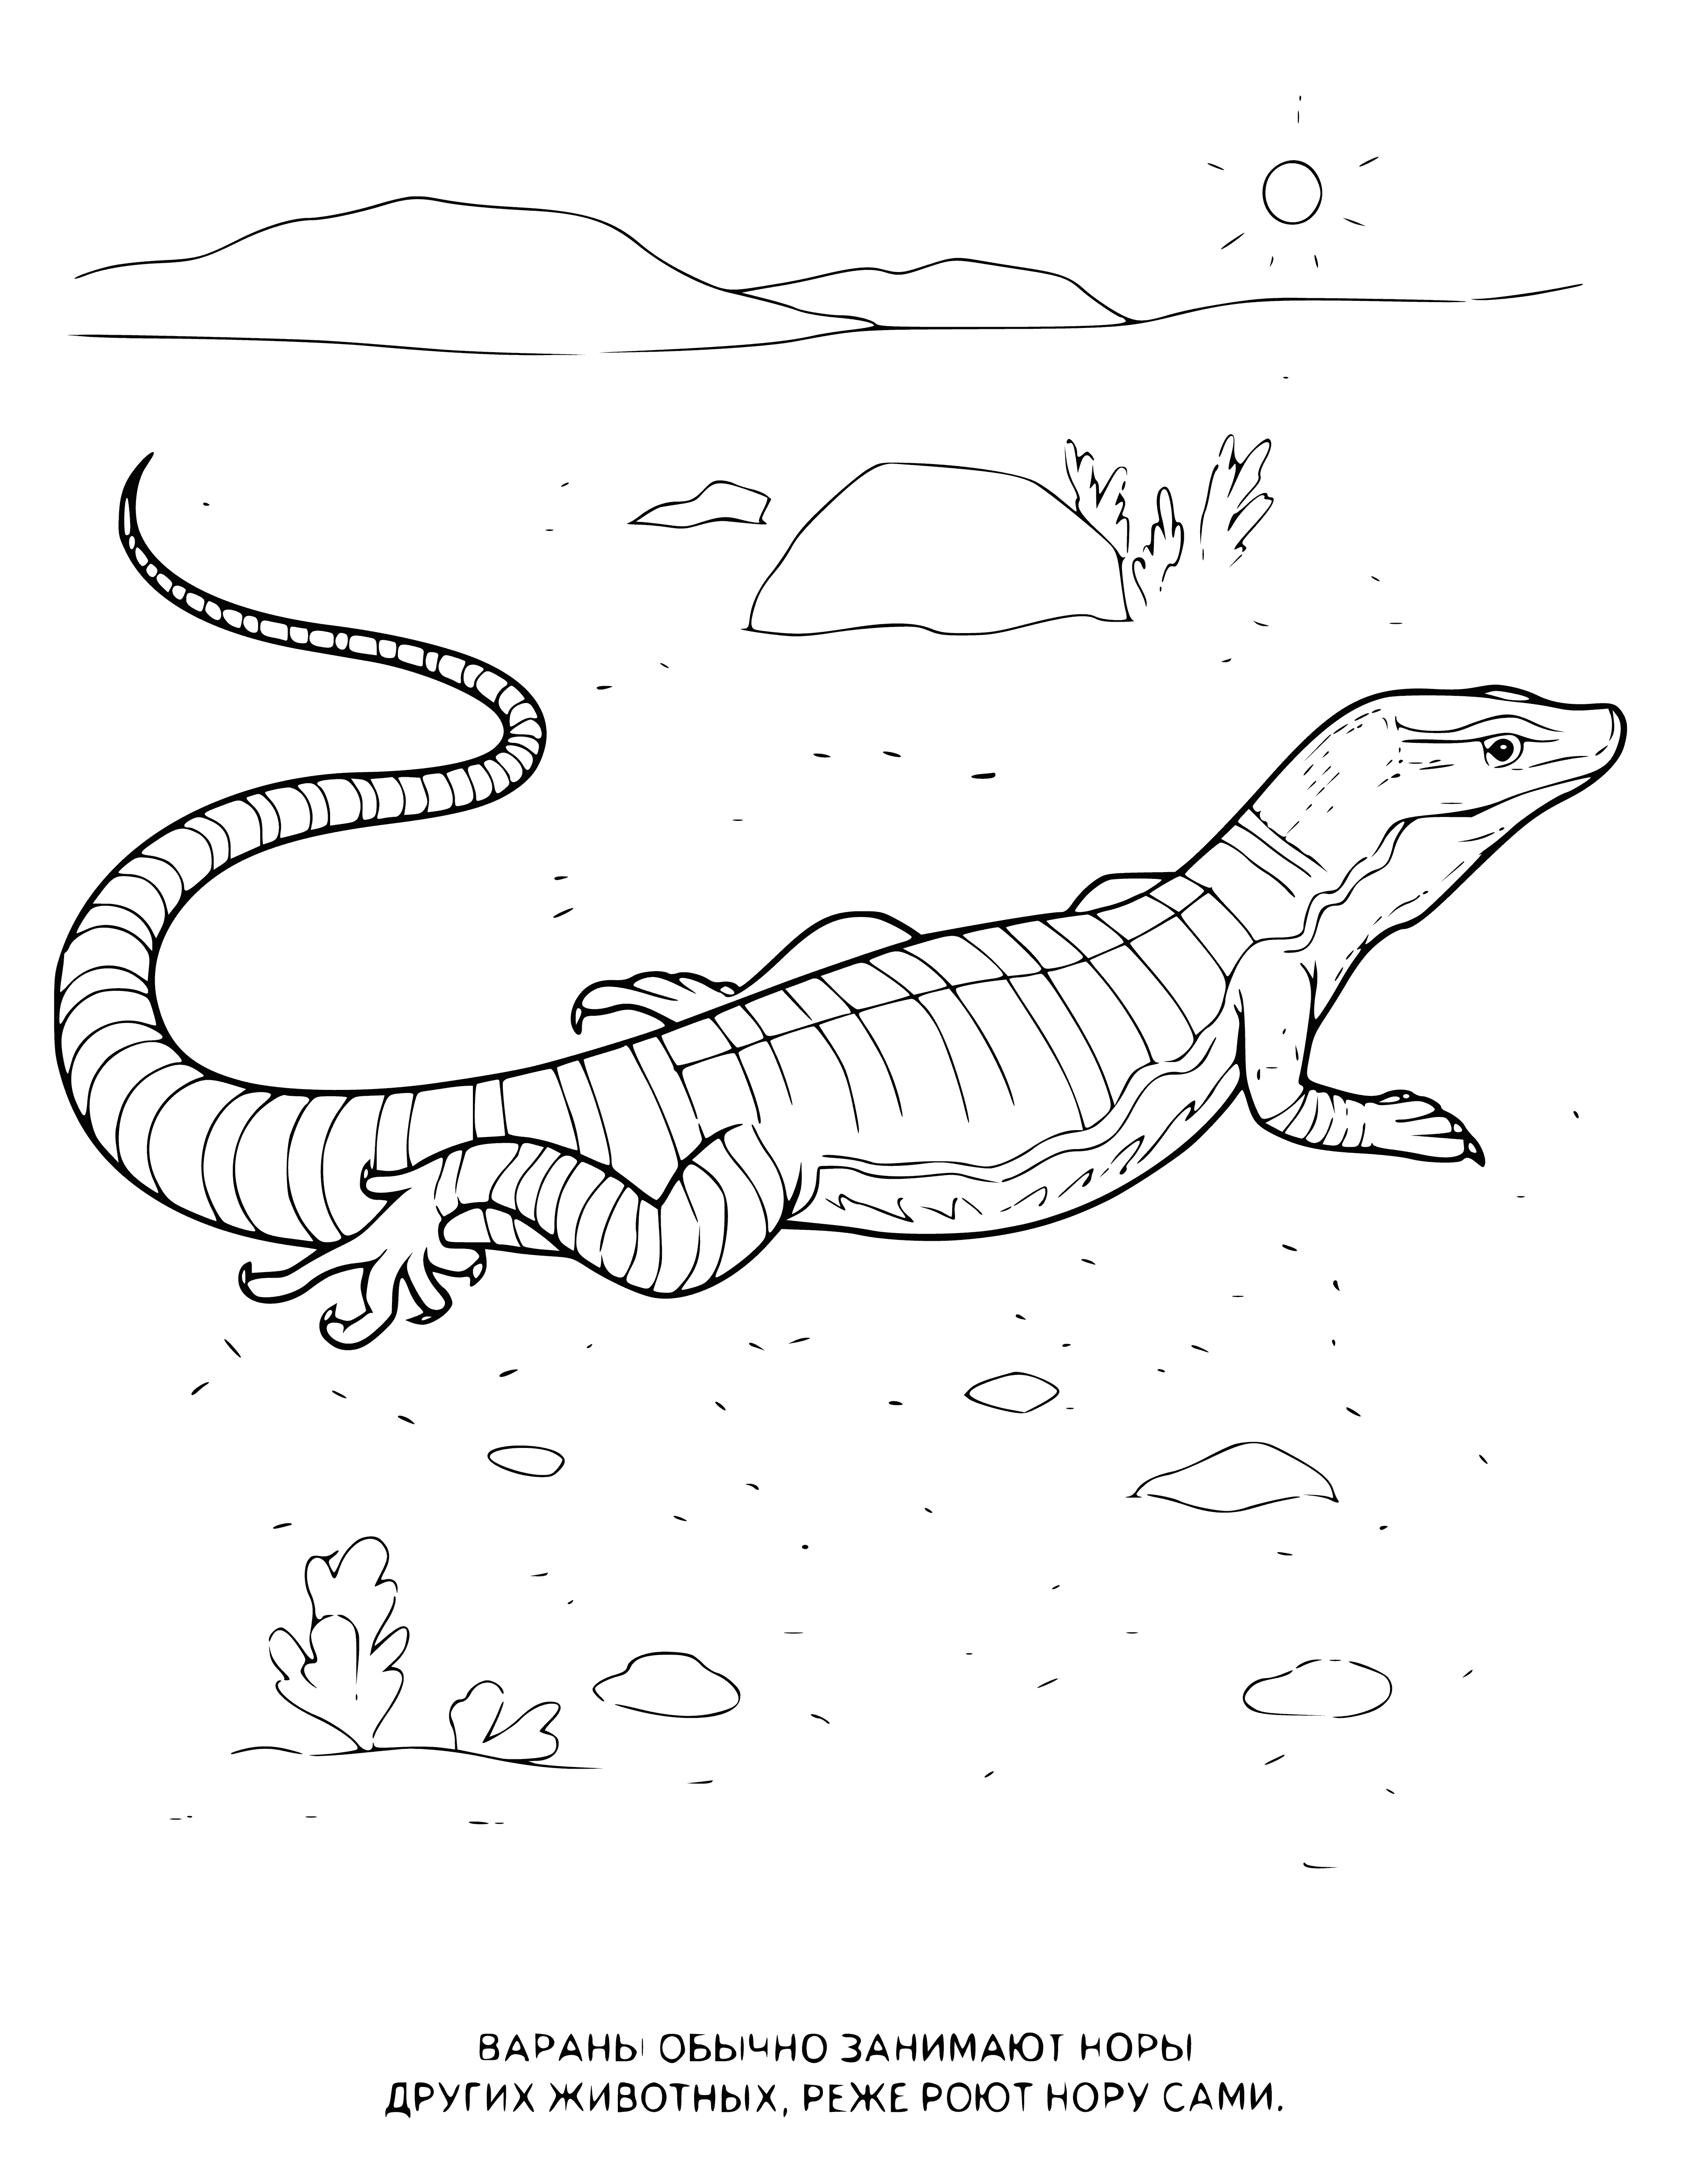 coloring page: Big, scaly reptile with yellow eyes, long snout and sharp claws. Has a green body with dark stripes. #ColoringPage